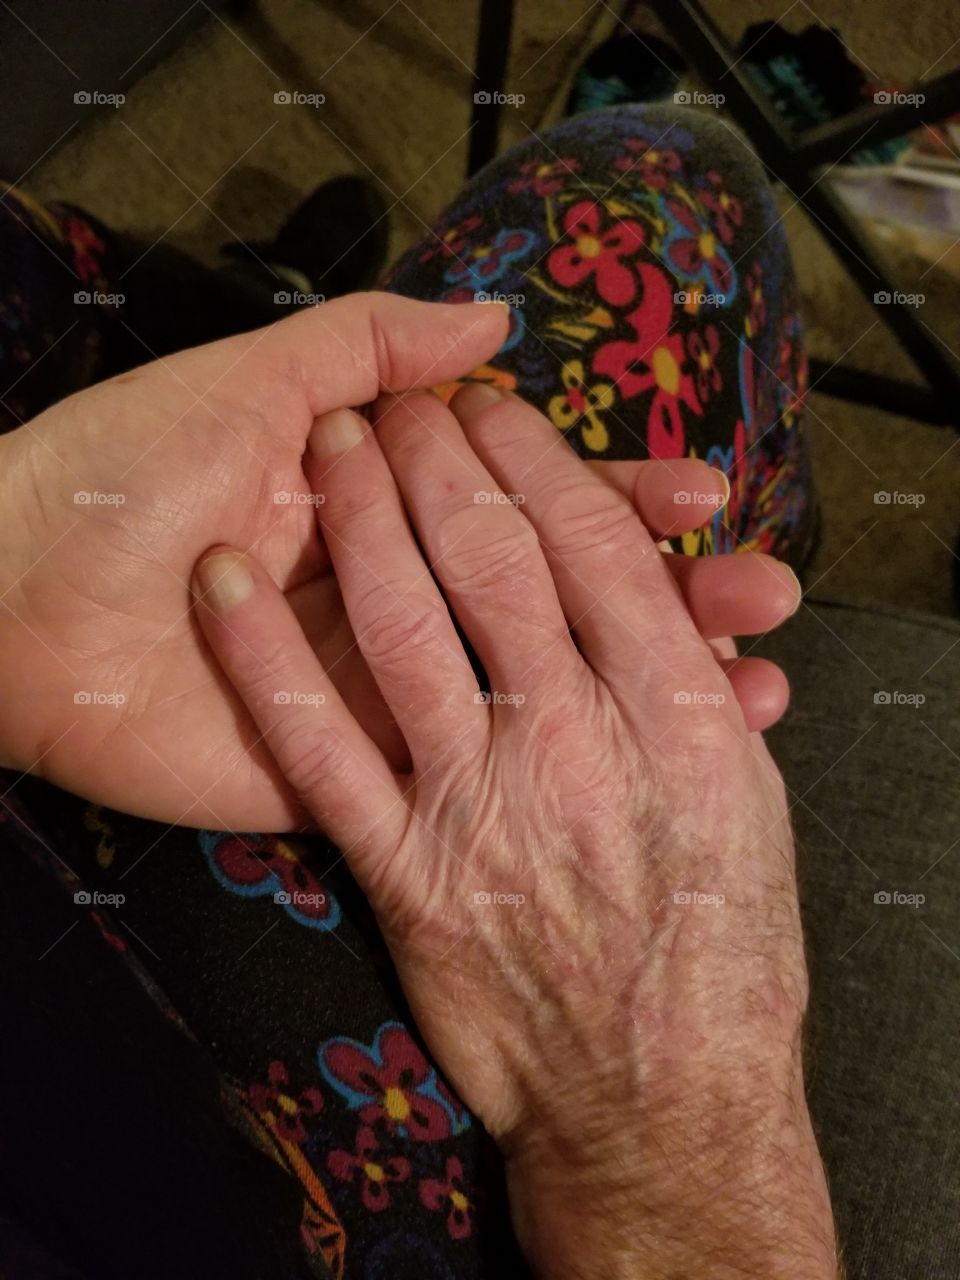 holding hands in middle age